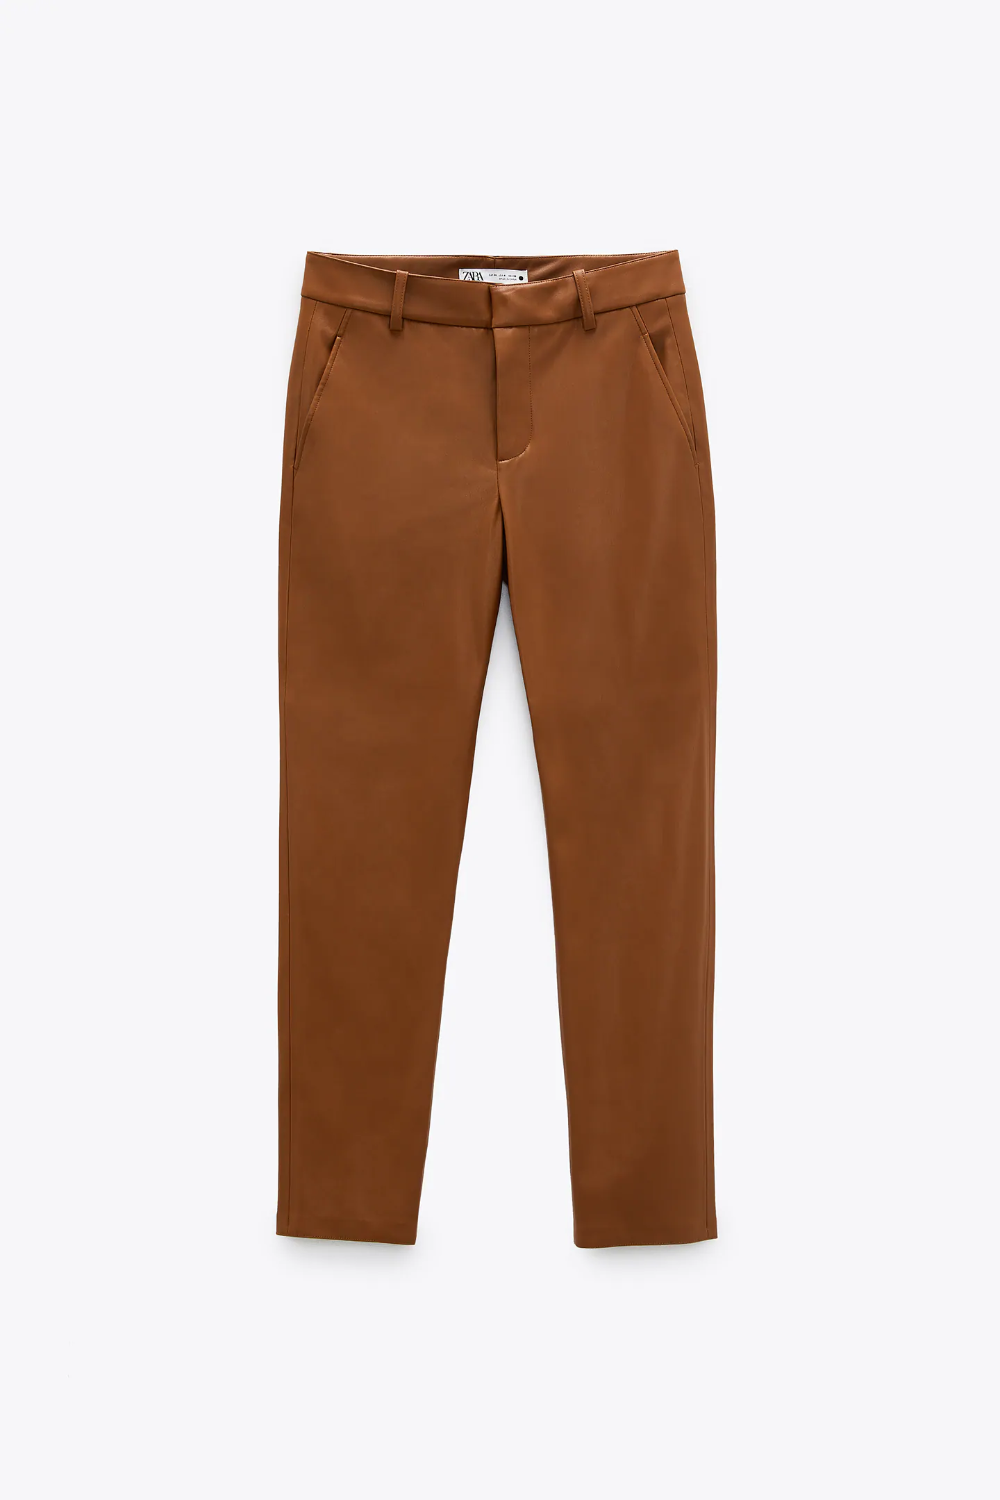 https://flyfiercefab.com/wp-content/uploads/2020/09/Zara-Brown-Leather-Pants.png